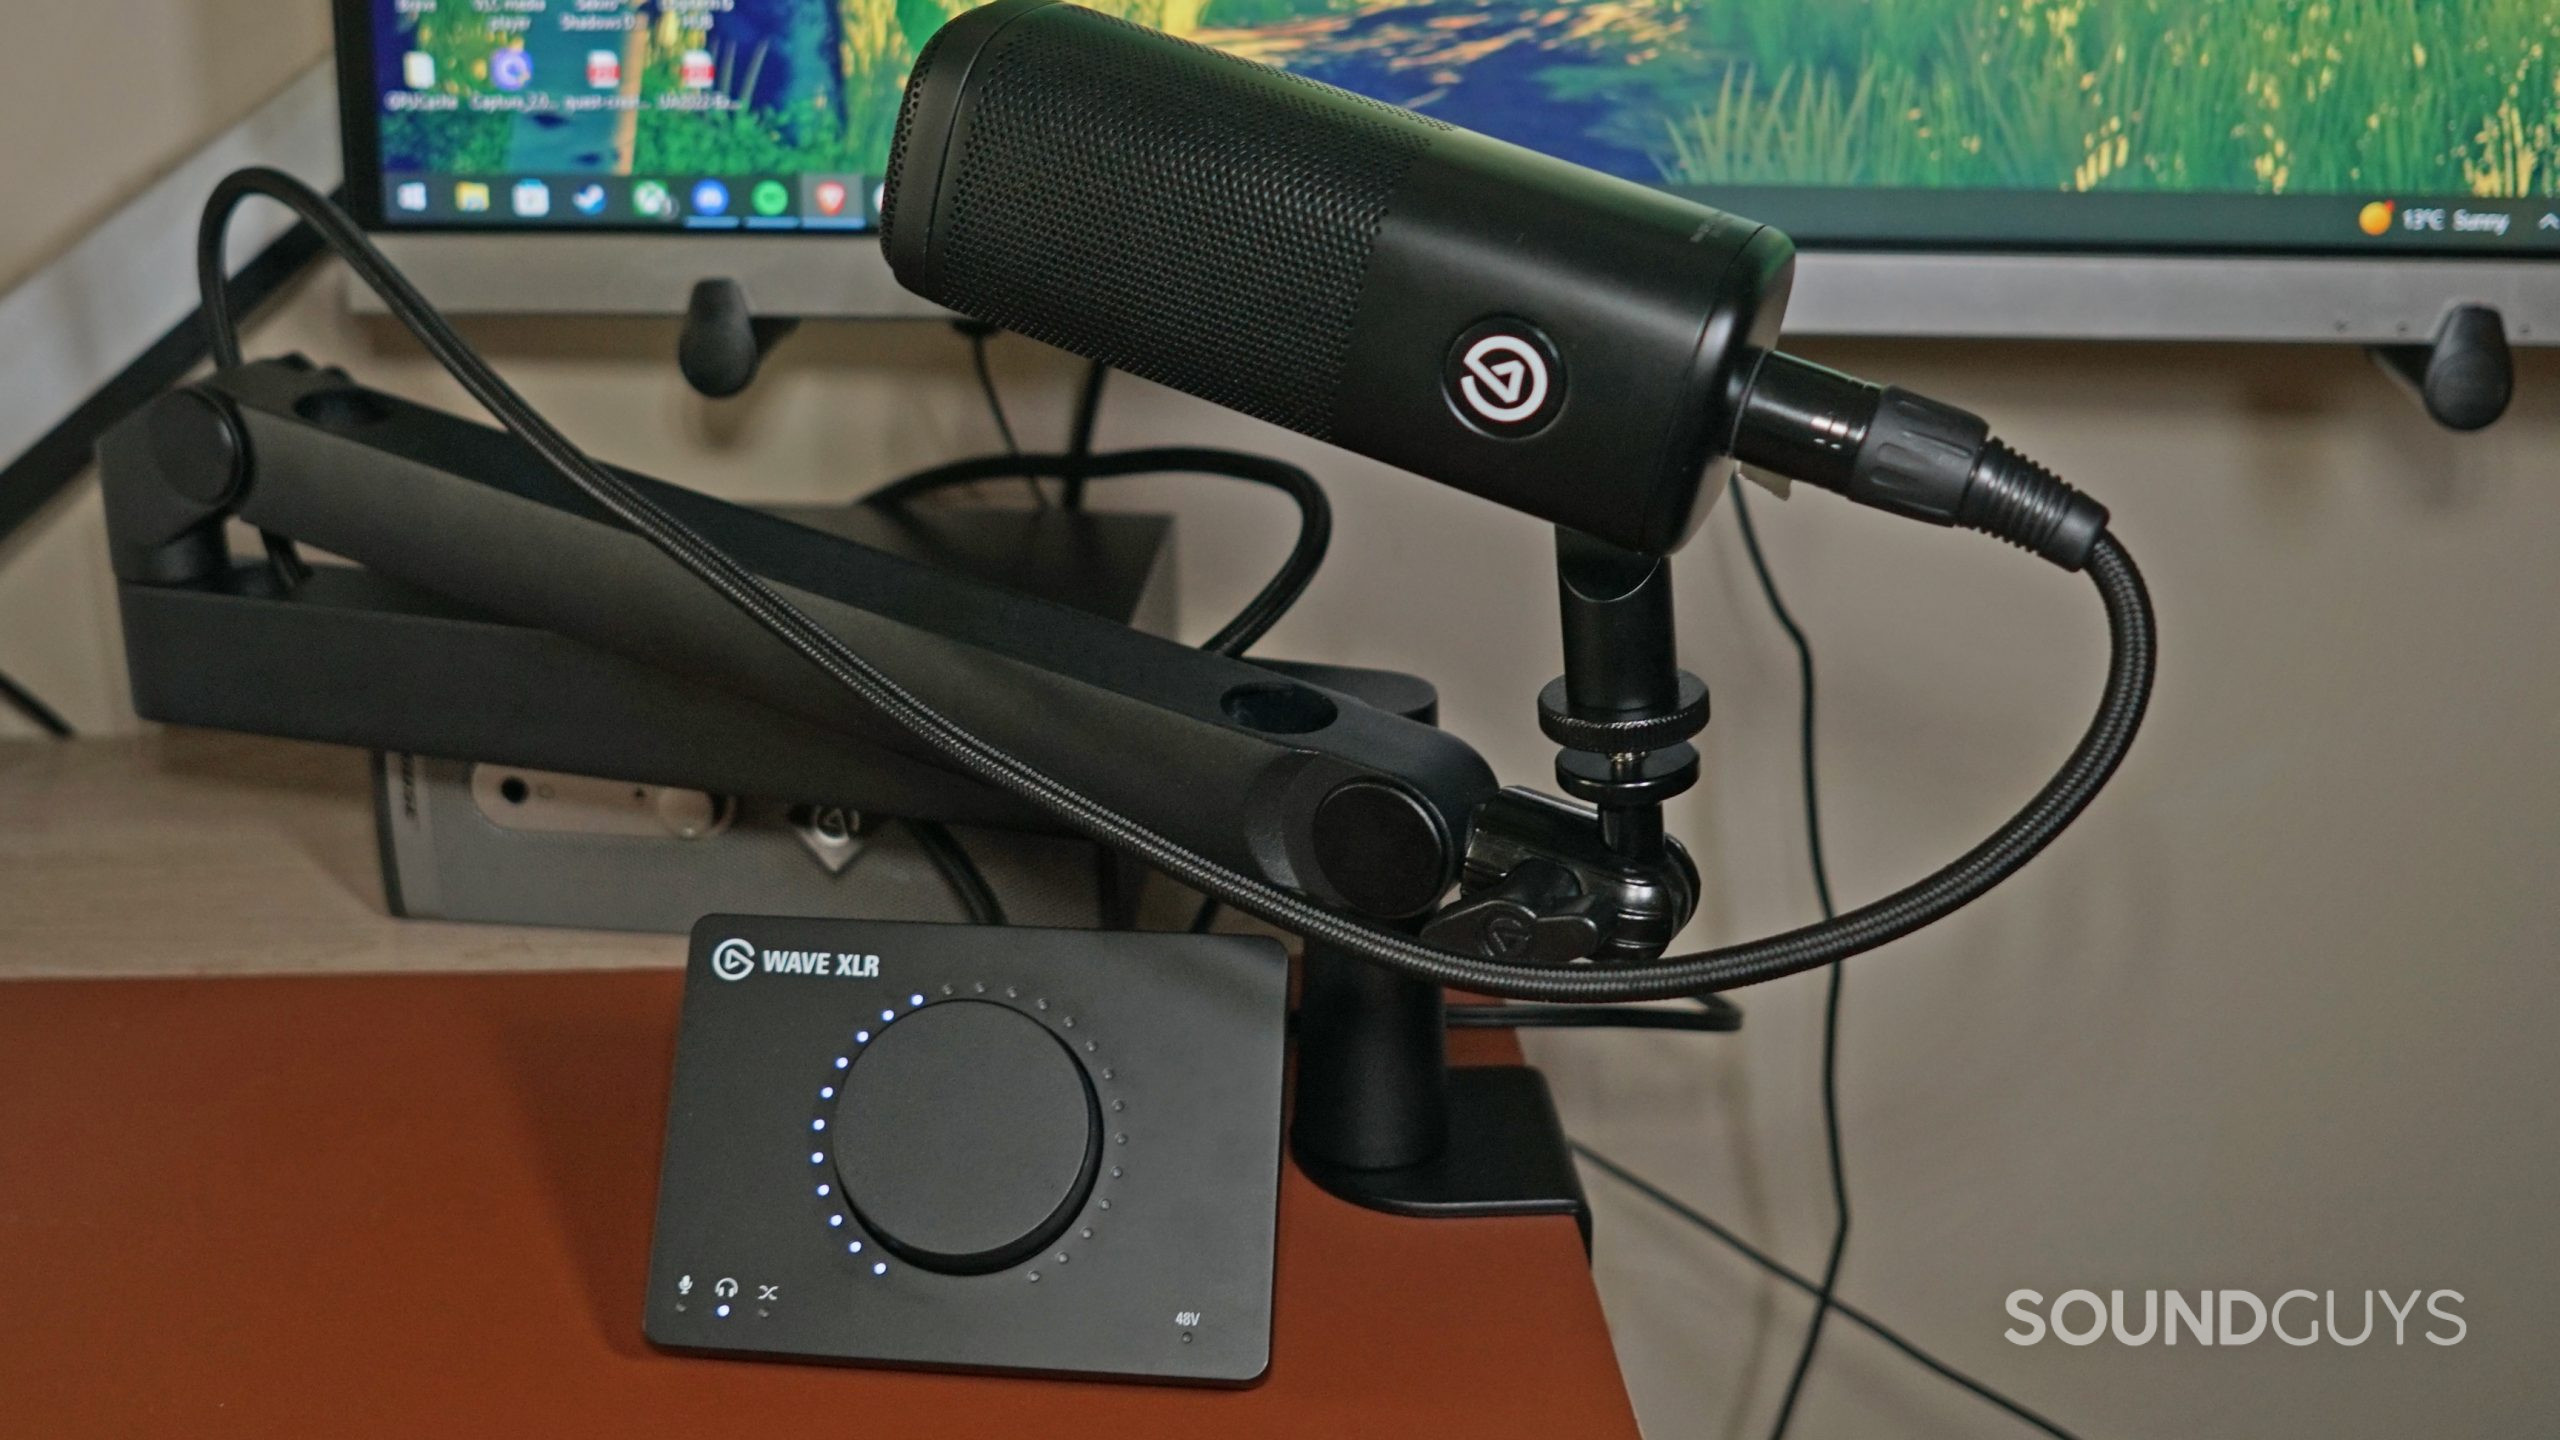 The Elgato Wave DX sits on an Elgato microphone arm above the Elgato Wave XLR audio interface on a desk in front of a Viewsonic computer monitor.